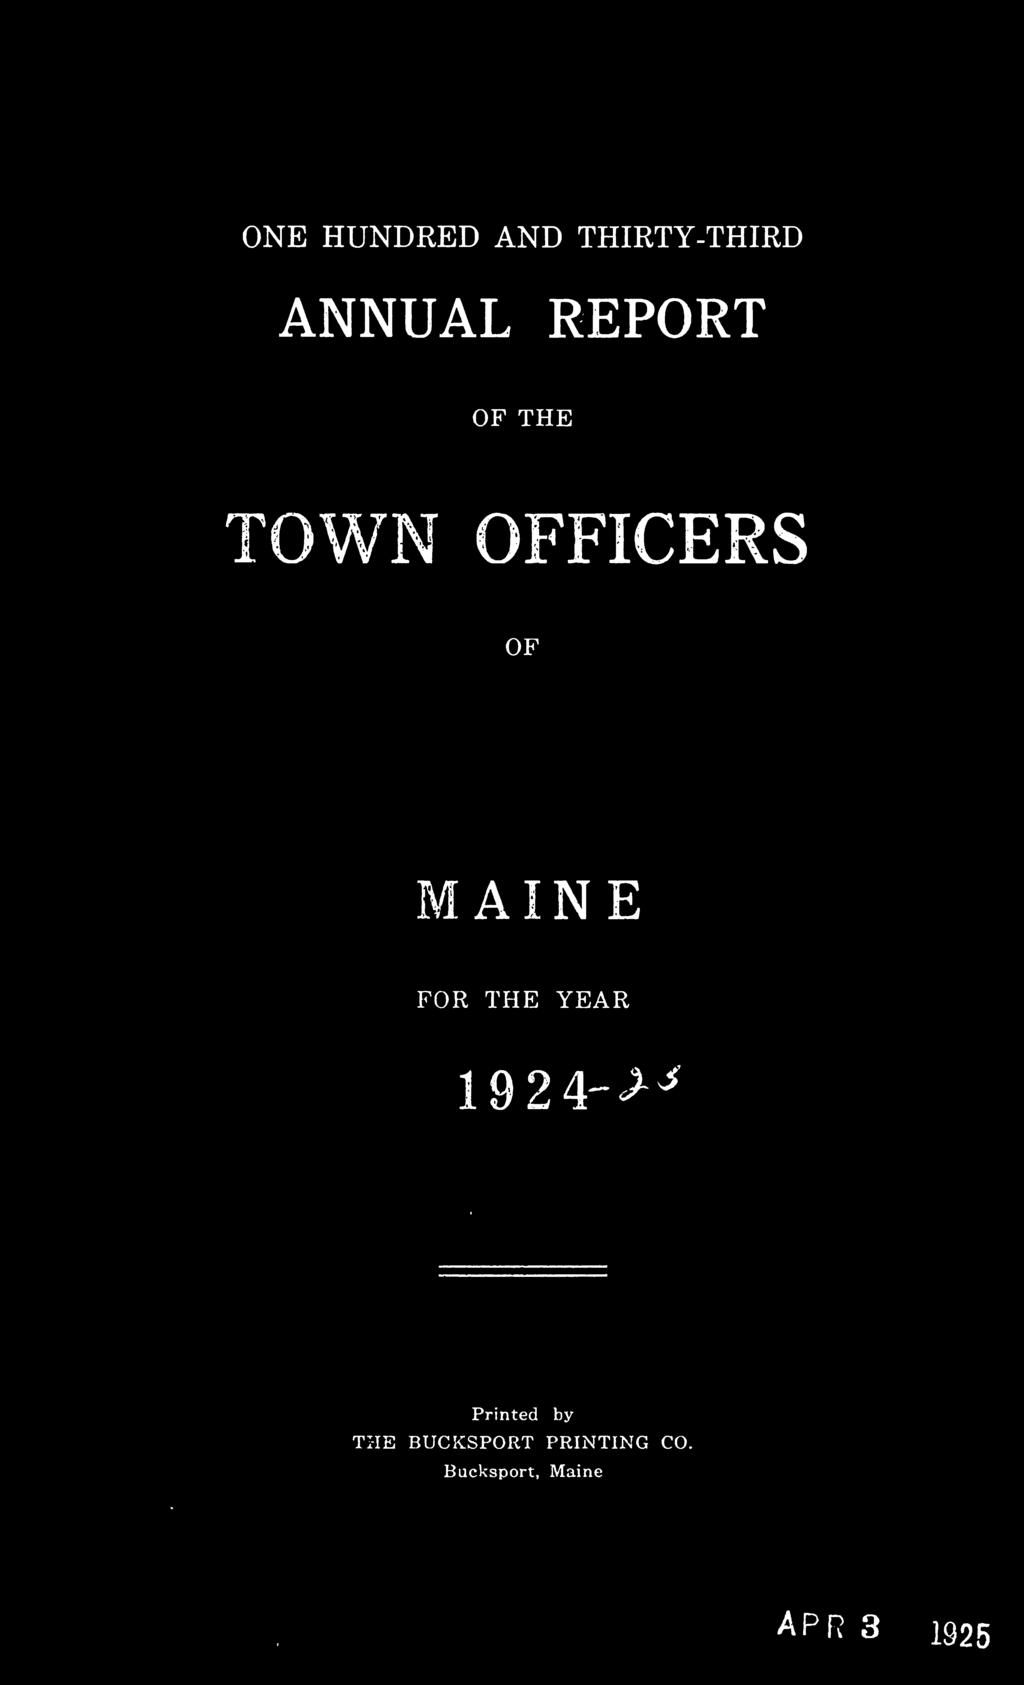 ONE HUNDRED AND THIRTY-THIRD ANNUAL REPORT OF THE TOWN OFFICERS OF MAINE FOR THE